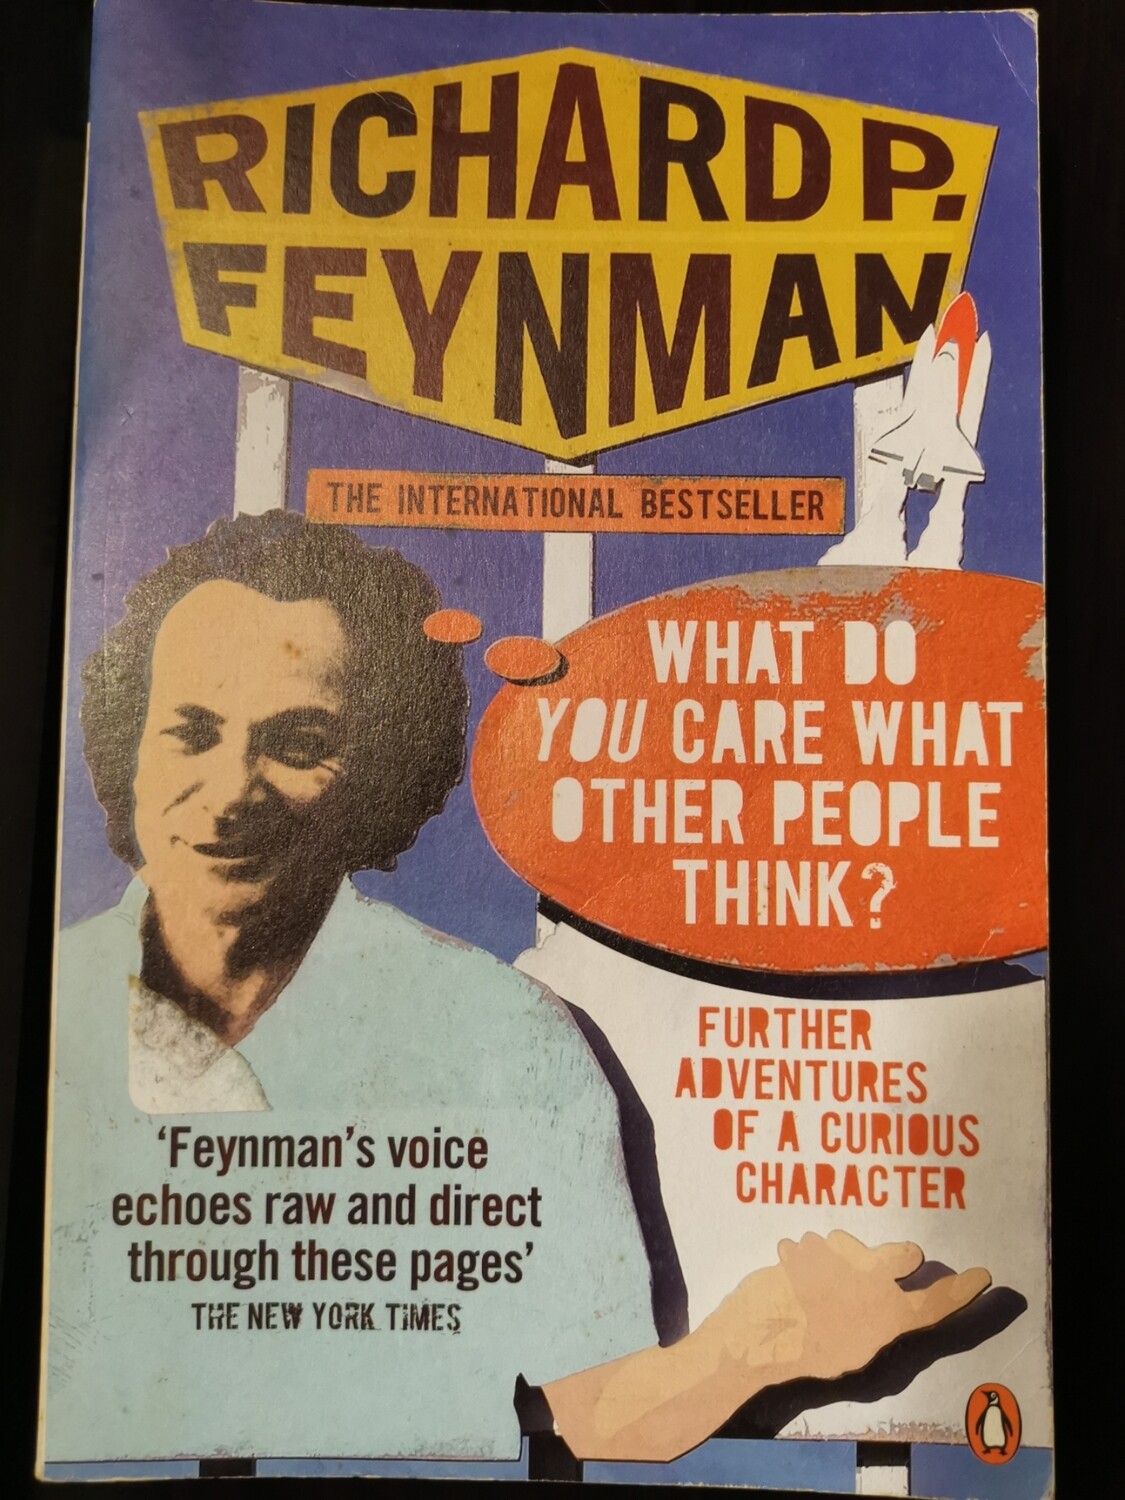 What do you care what other people think?, Richard Feynman